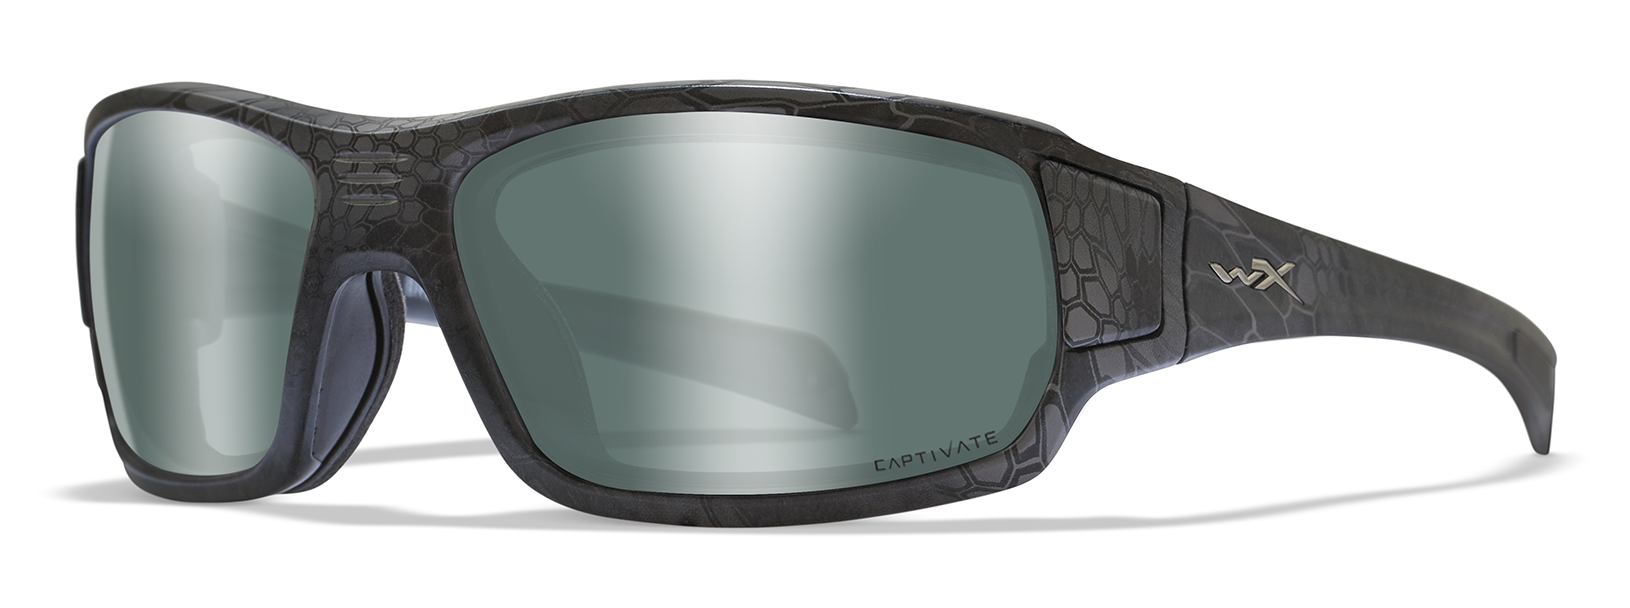 Wiley X Breach sunglasses in Kryptek grey with python pattern and CAPTIVATE polarized silver lenses.